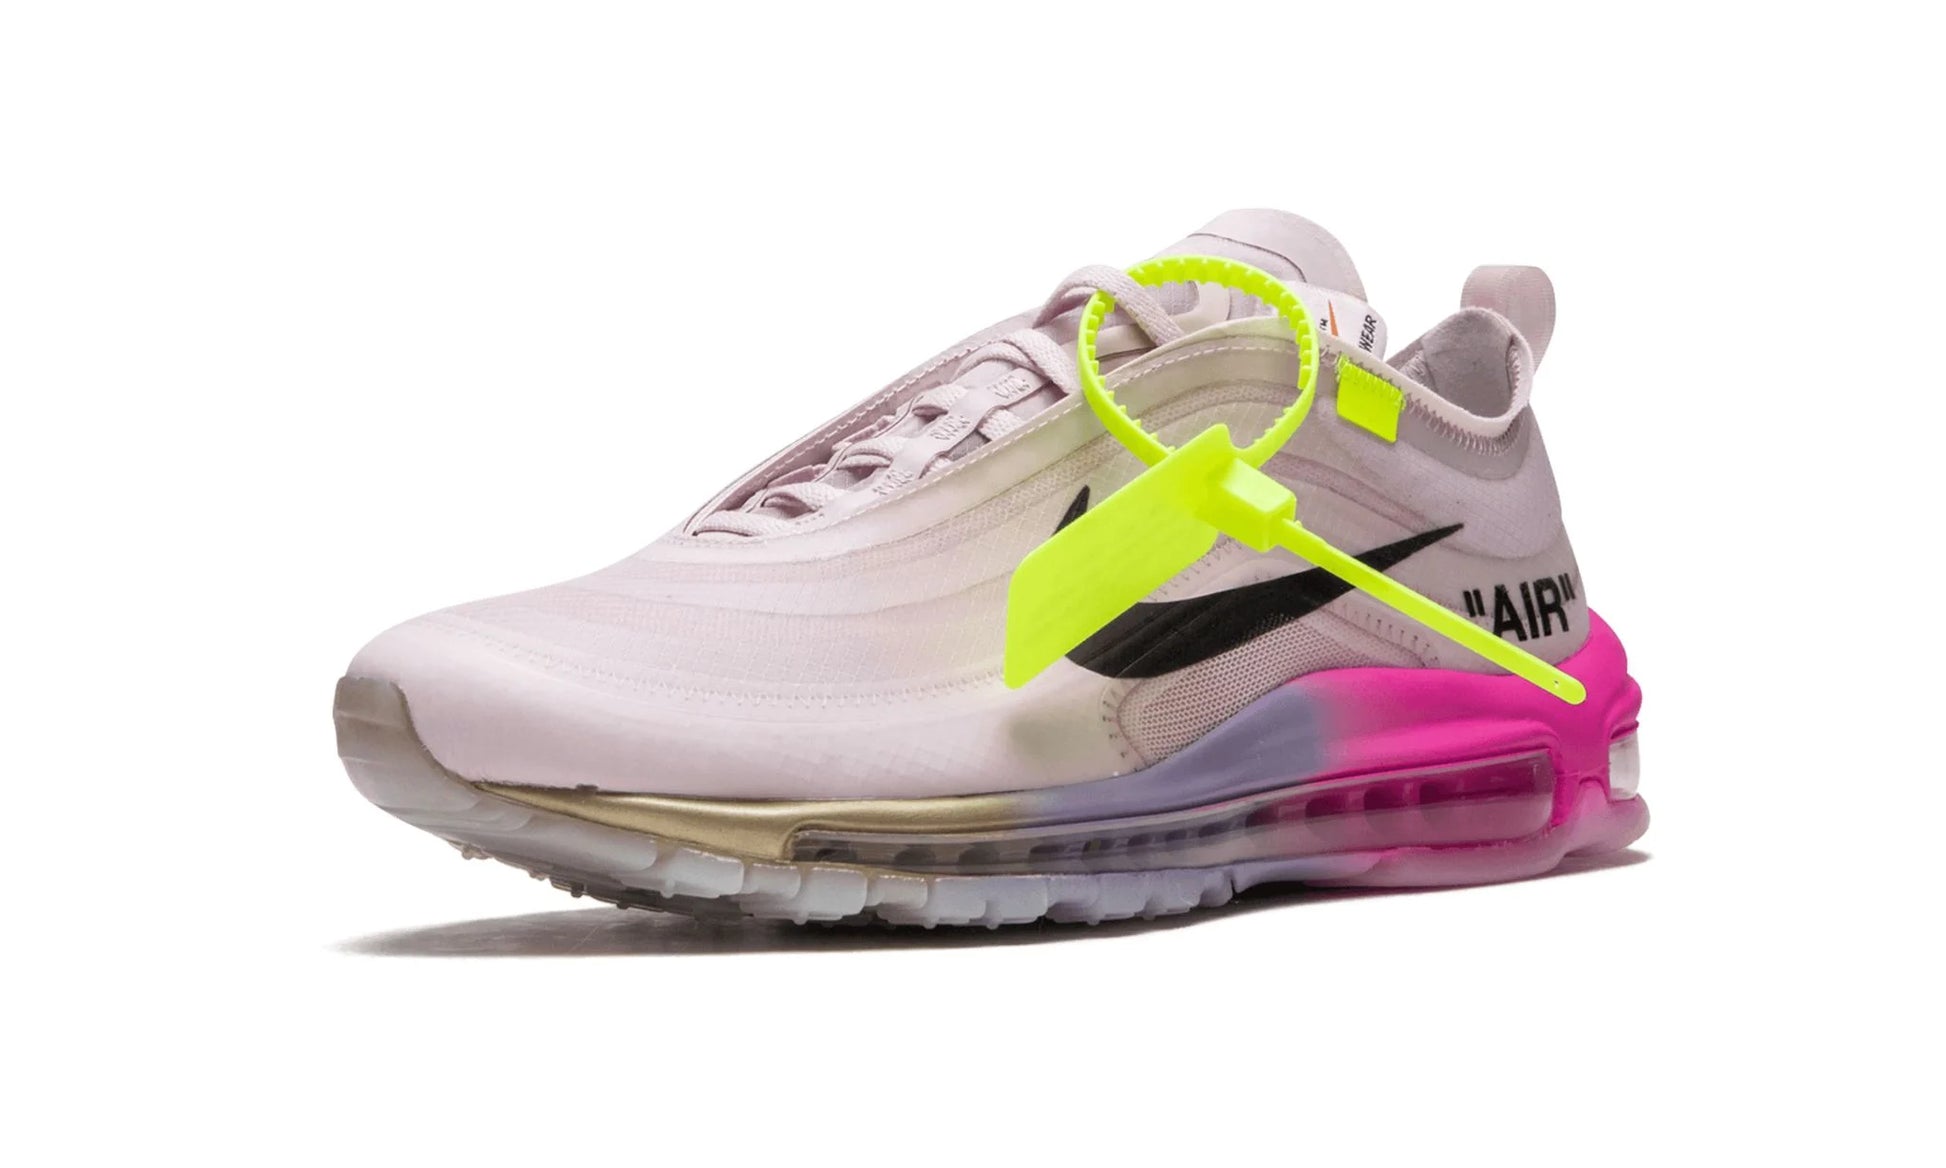 Off-White Nike Air Max 97 Serena Williams Queen Front Left